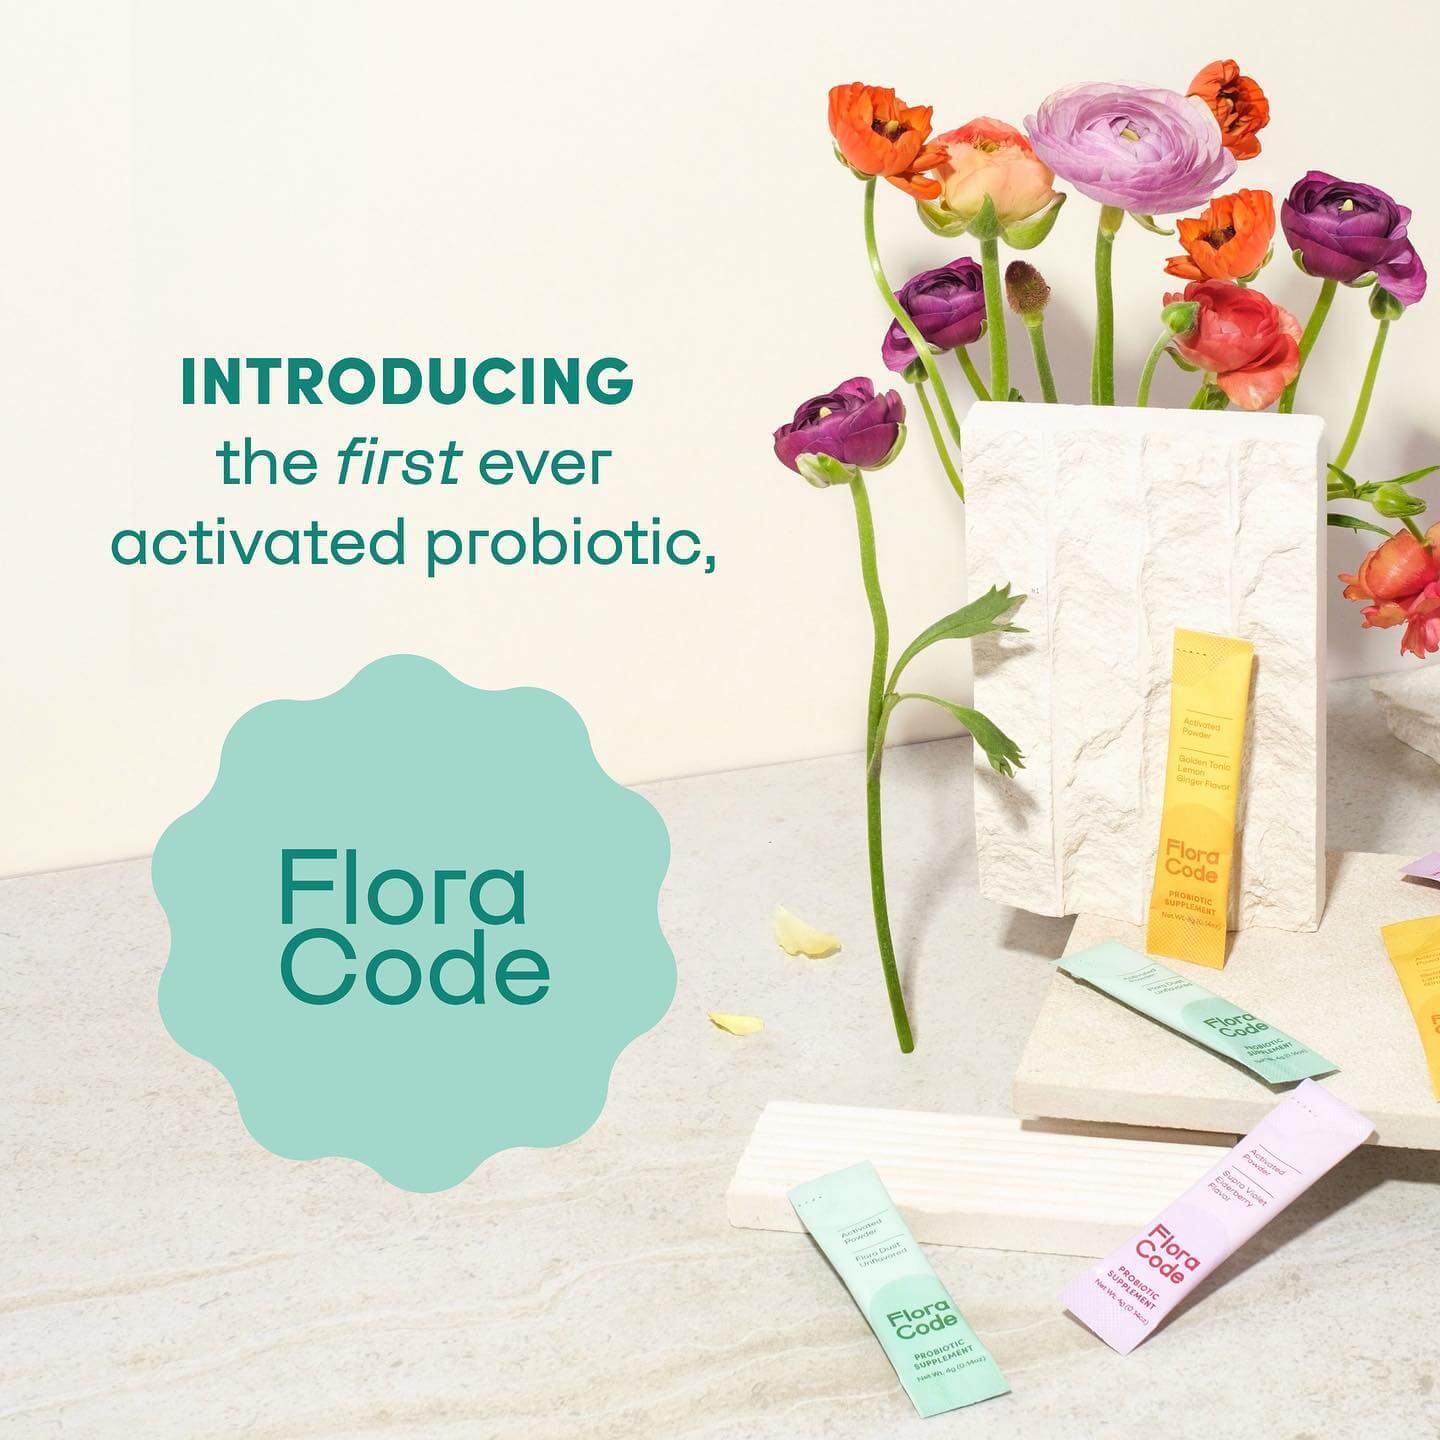 flora code - the first ever activated probiotic for gut health